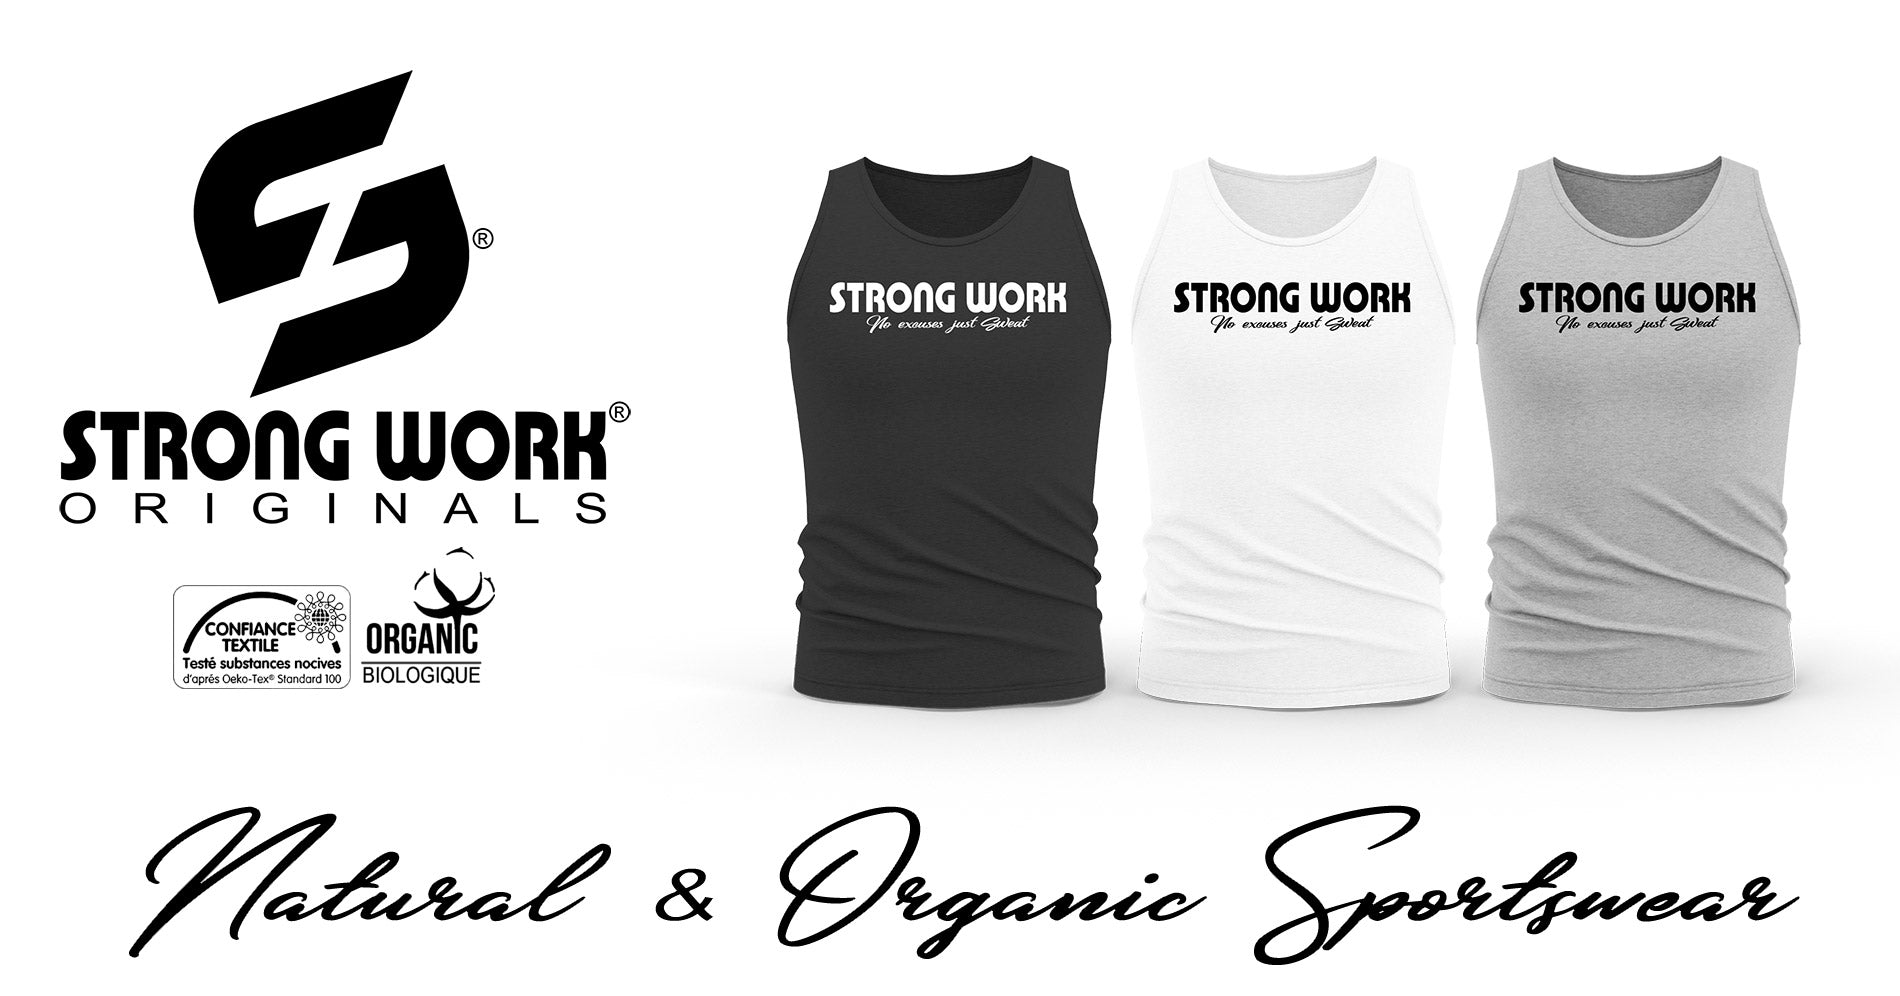 STRONG WORK CLASSIC ORGANIC COTTON TANK TOP FOR WOMEN - ORIGINALS COLLECTION